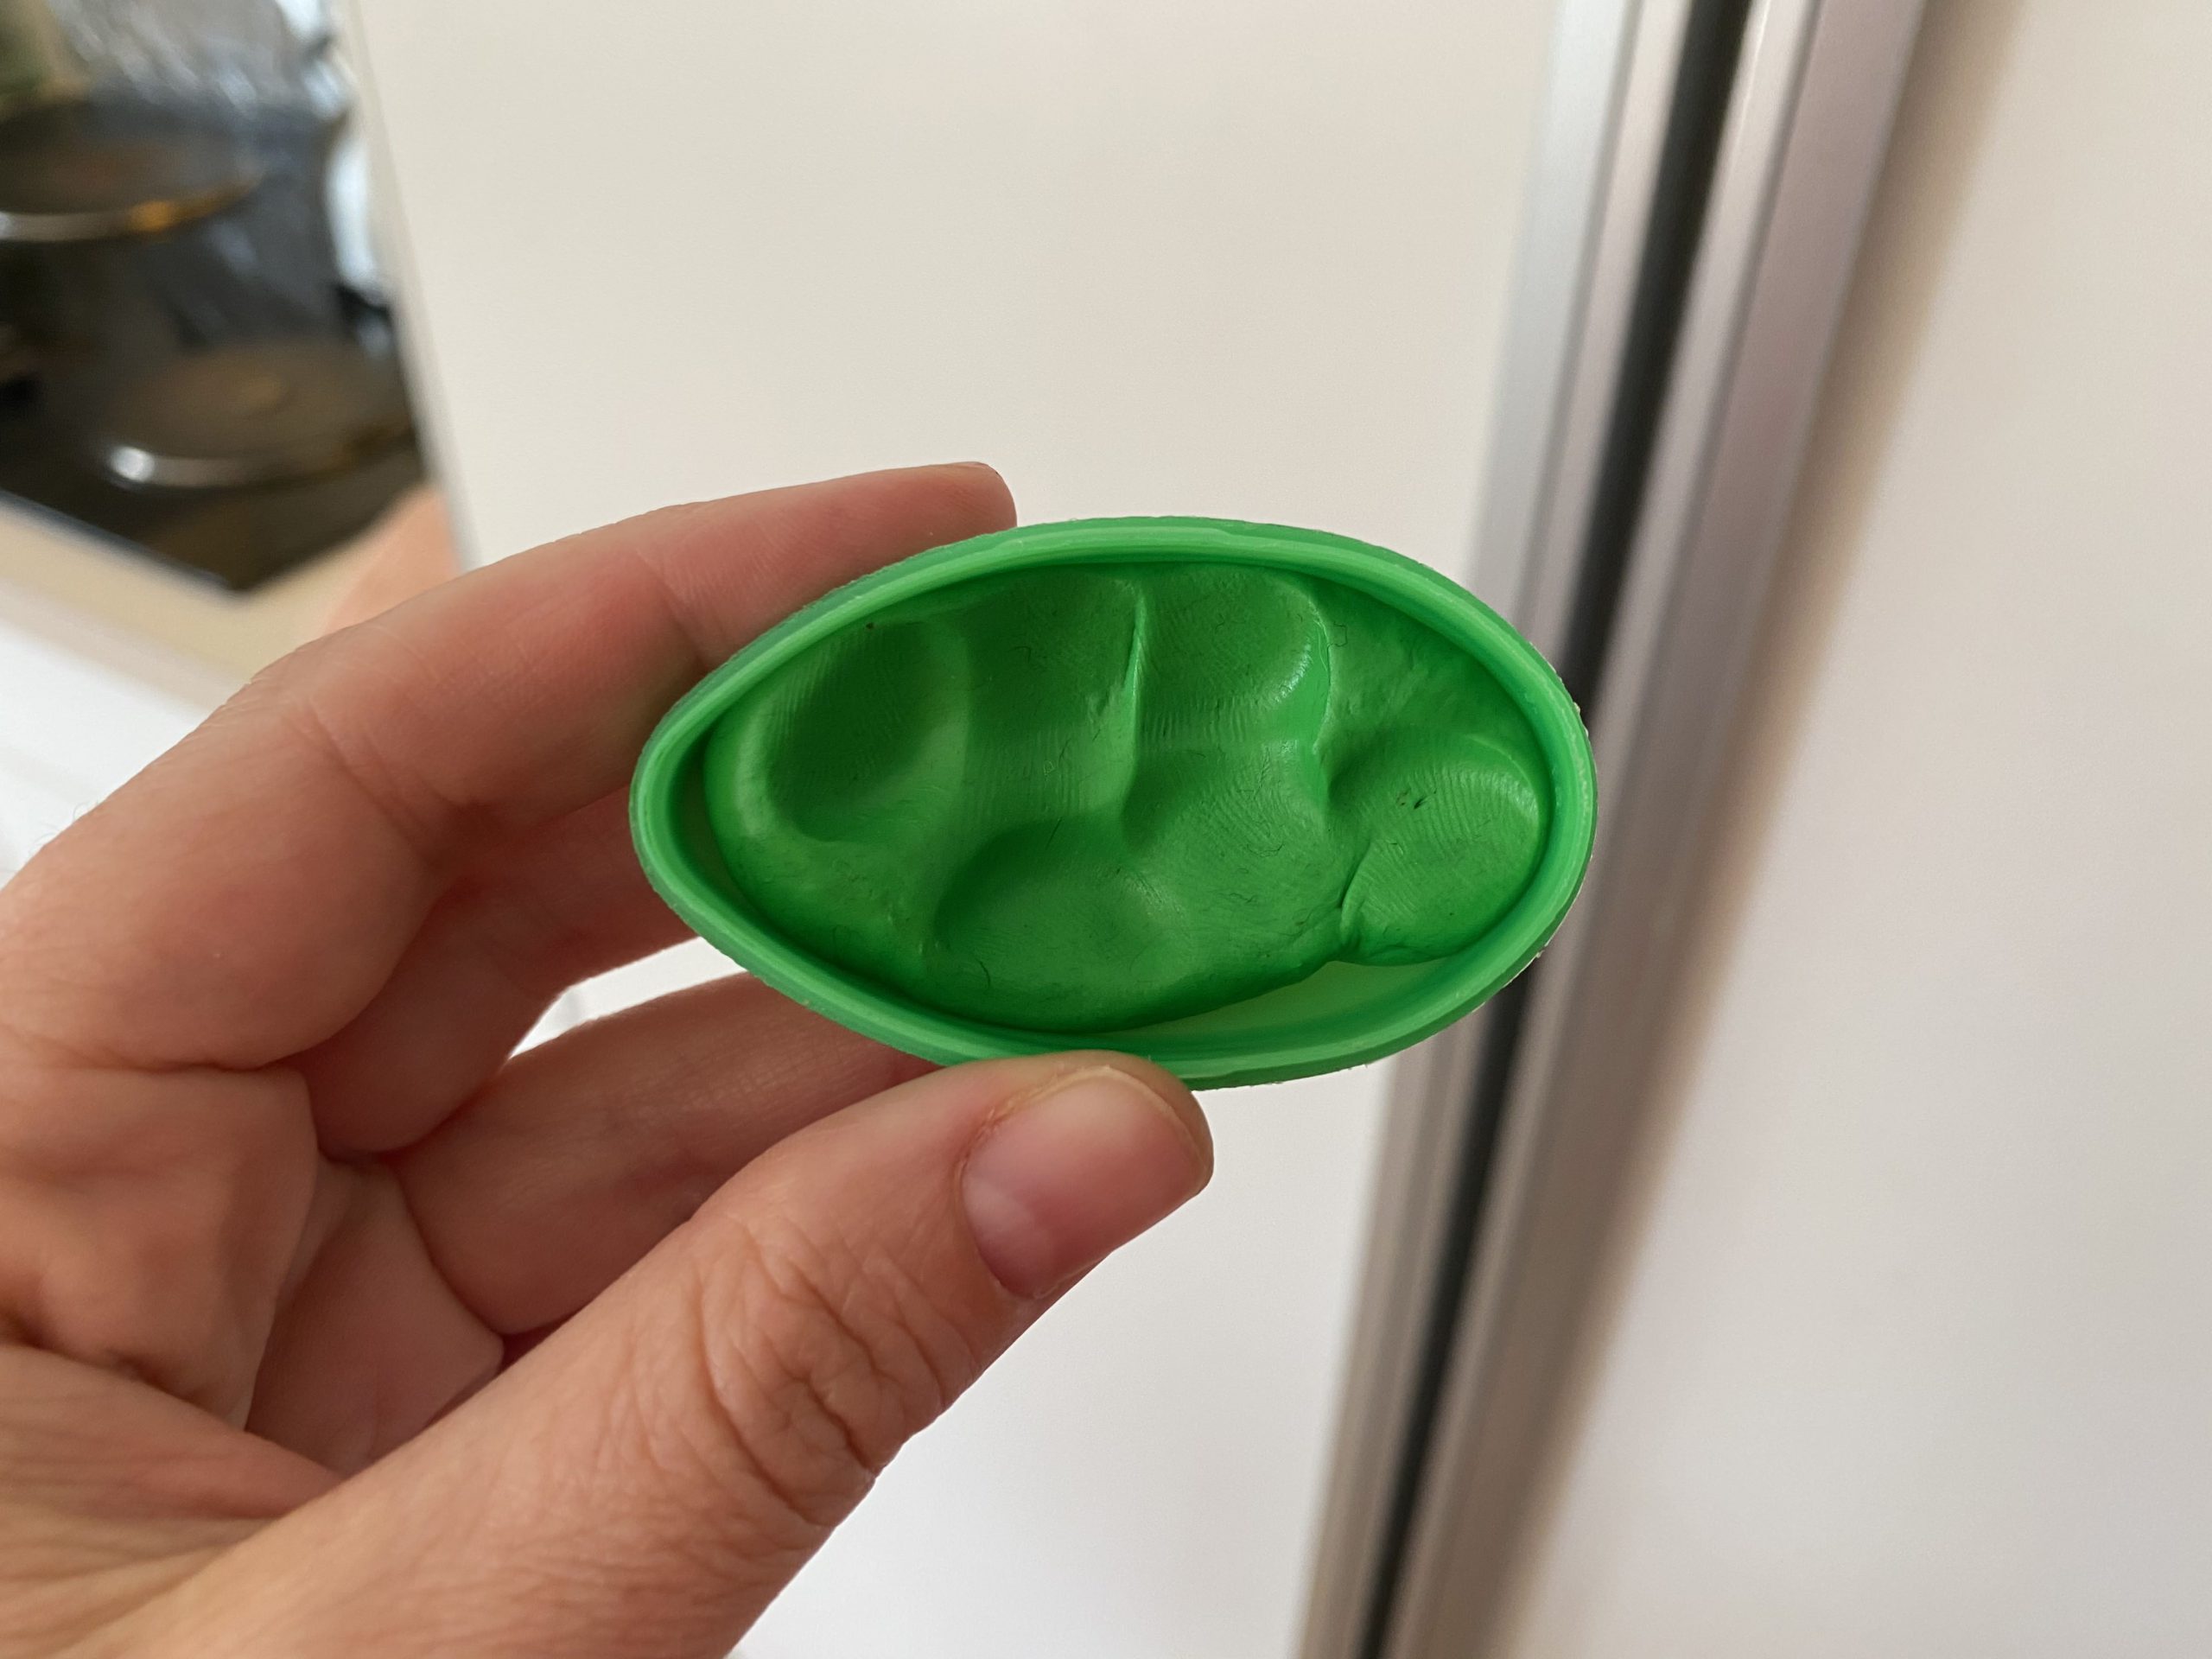 Hand holding green Silly Putty